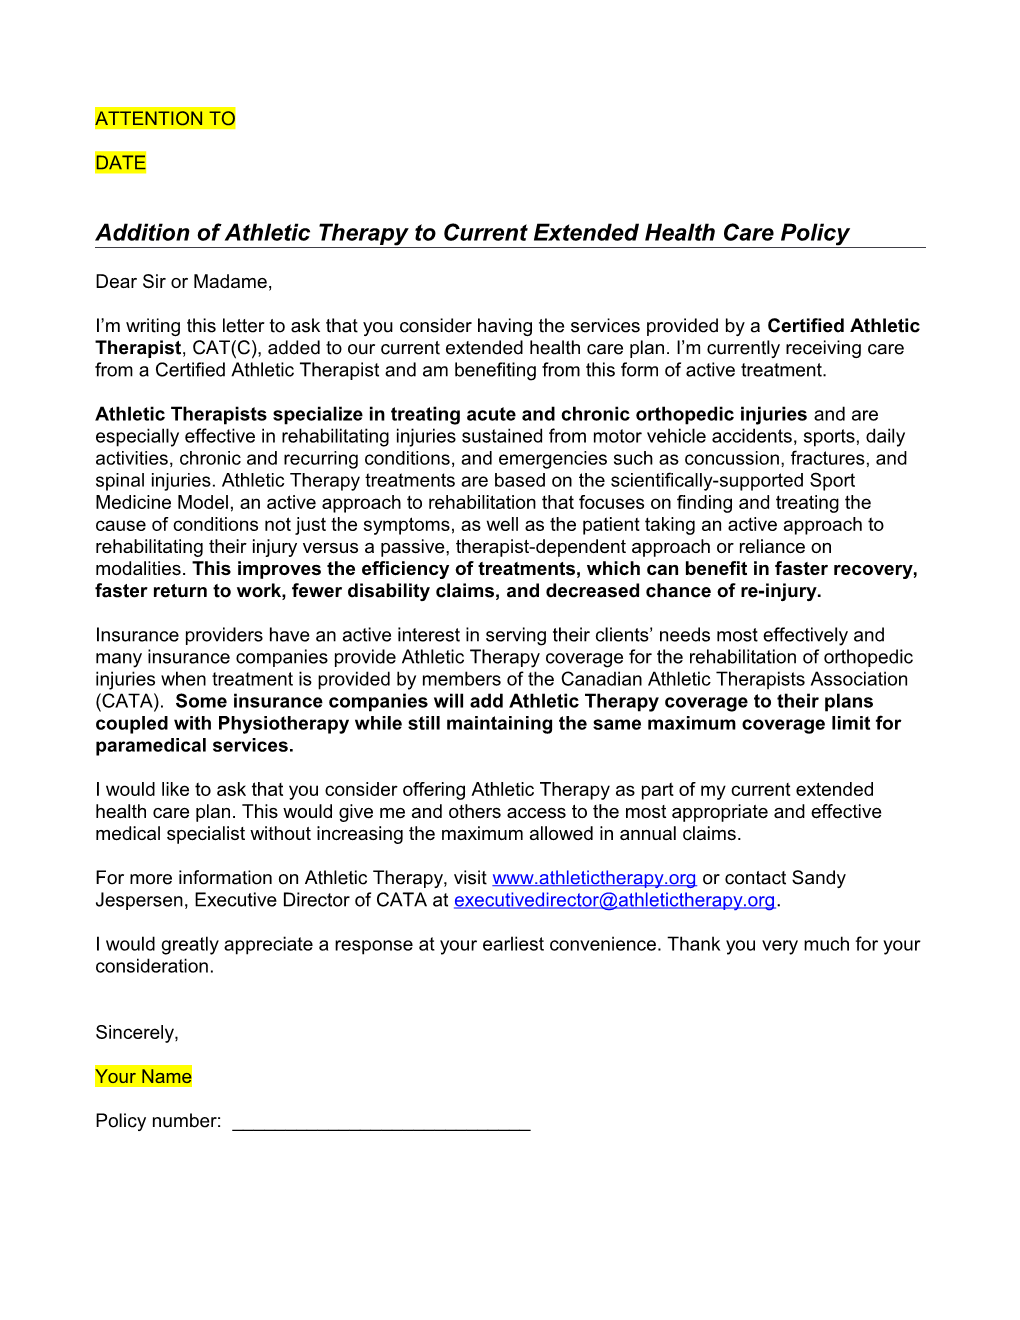 Addition of Athletic Therapy to Current Extended Health Care Policy